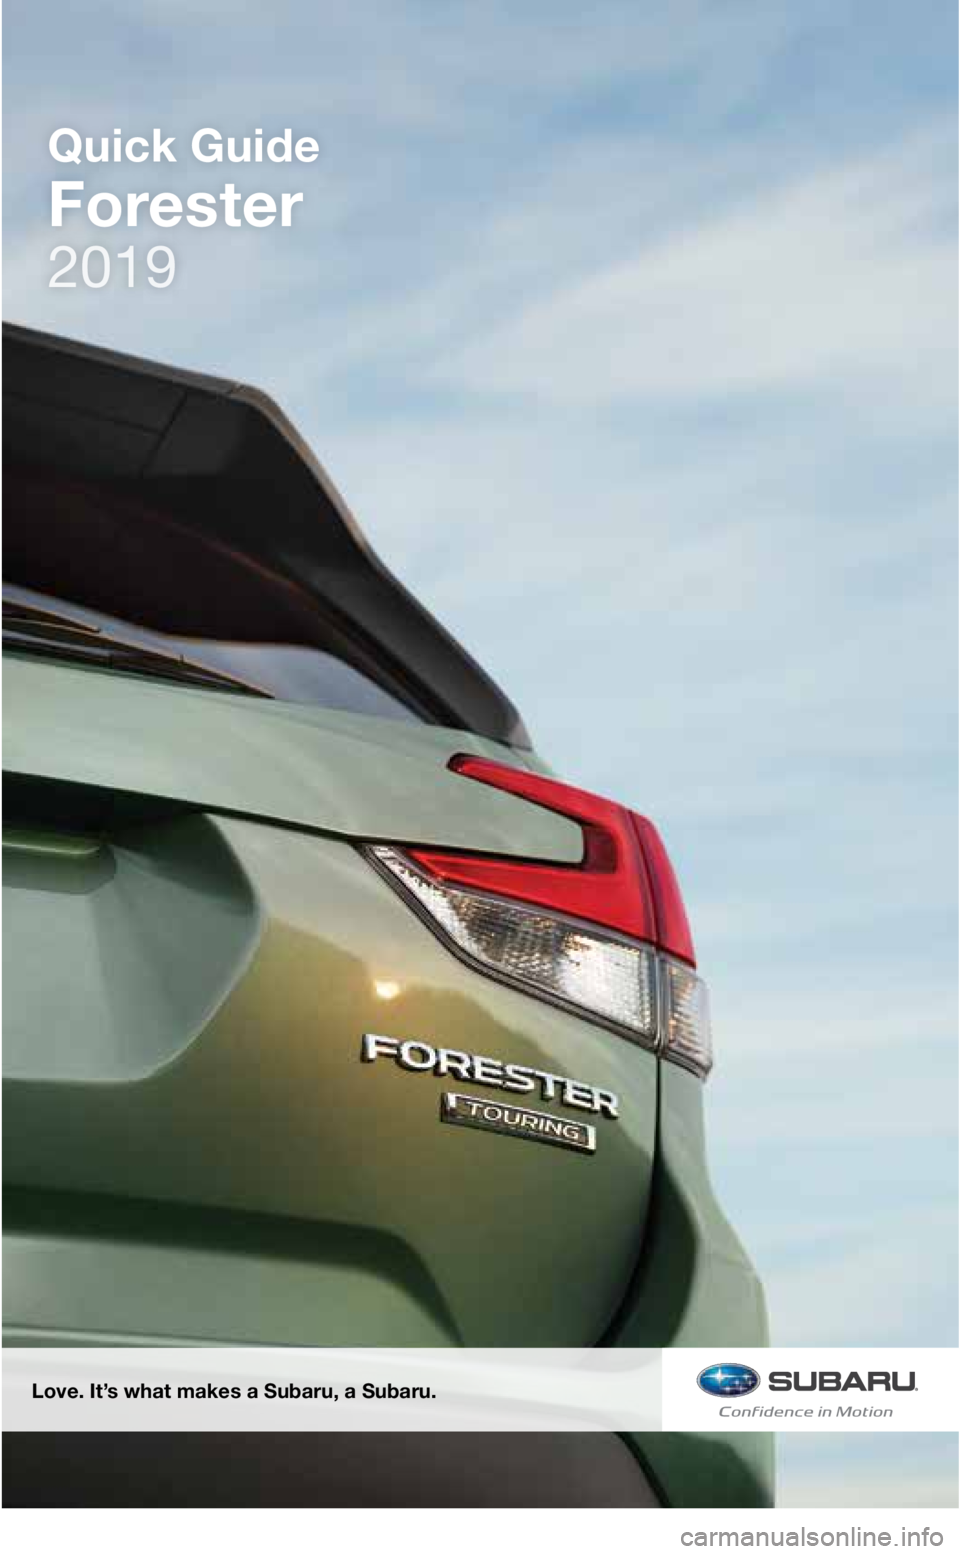 SUBARU FORESTER 2019  Quick Guide Love. It’s what makes a Subaru, a Subaru.
Quick Guide
Forester
3495150_19a_Subaru_Forester_QRG_070318.indd   27/3/18   1:05 PM 
2019     